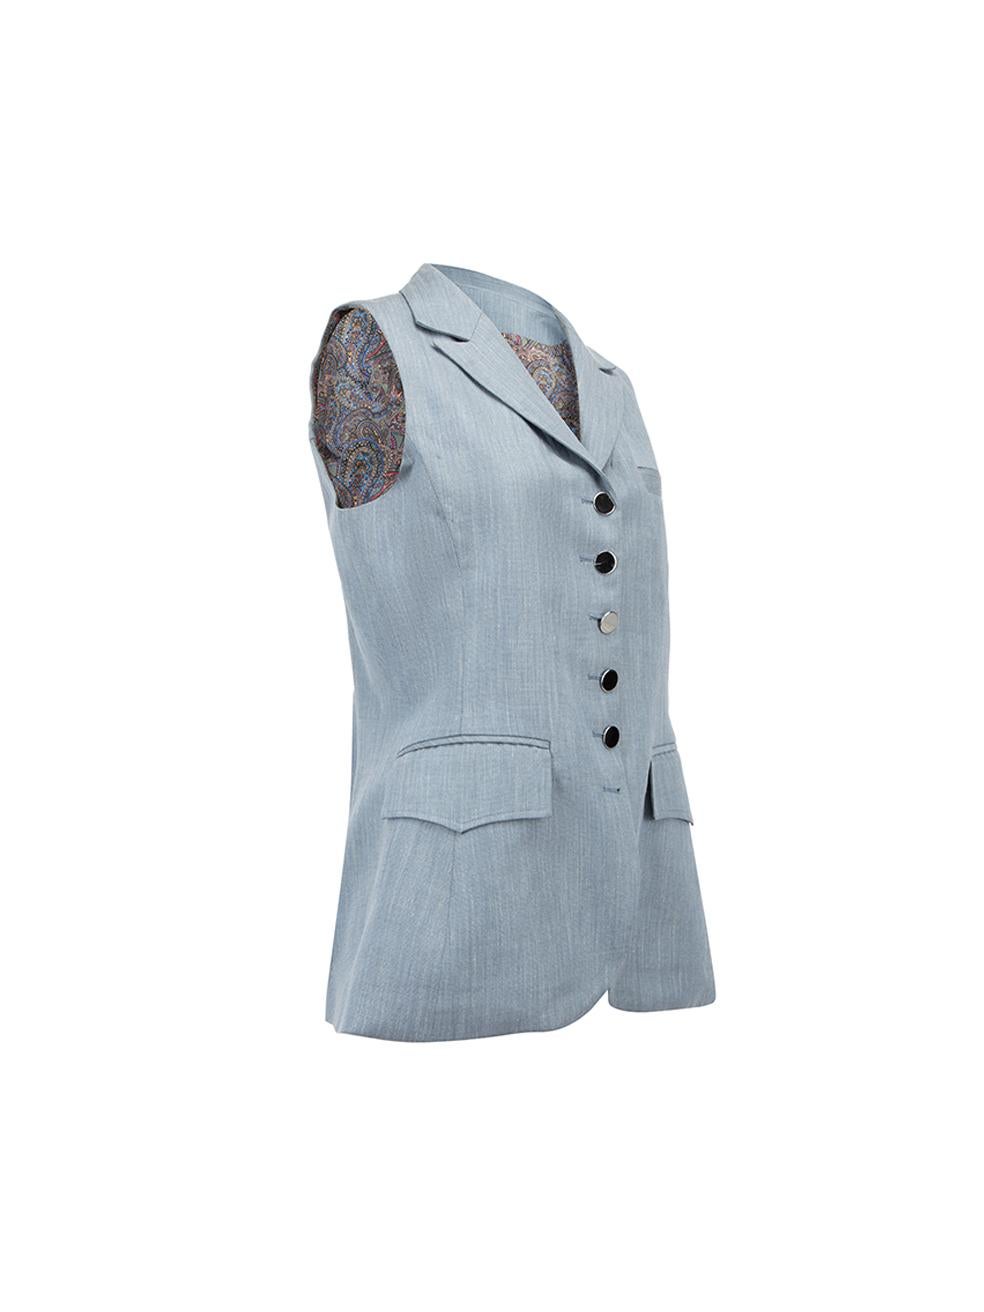 CONDITION is Very good. Hardly any visible wear to jacket is evident on this Sanne designer sample item. Please note that this item does not have brand label.
 
 Details
  Designer sample item
 Blue
 Wool
 Hip length waistcoat
 Front button up